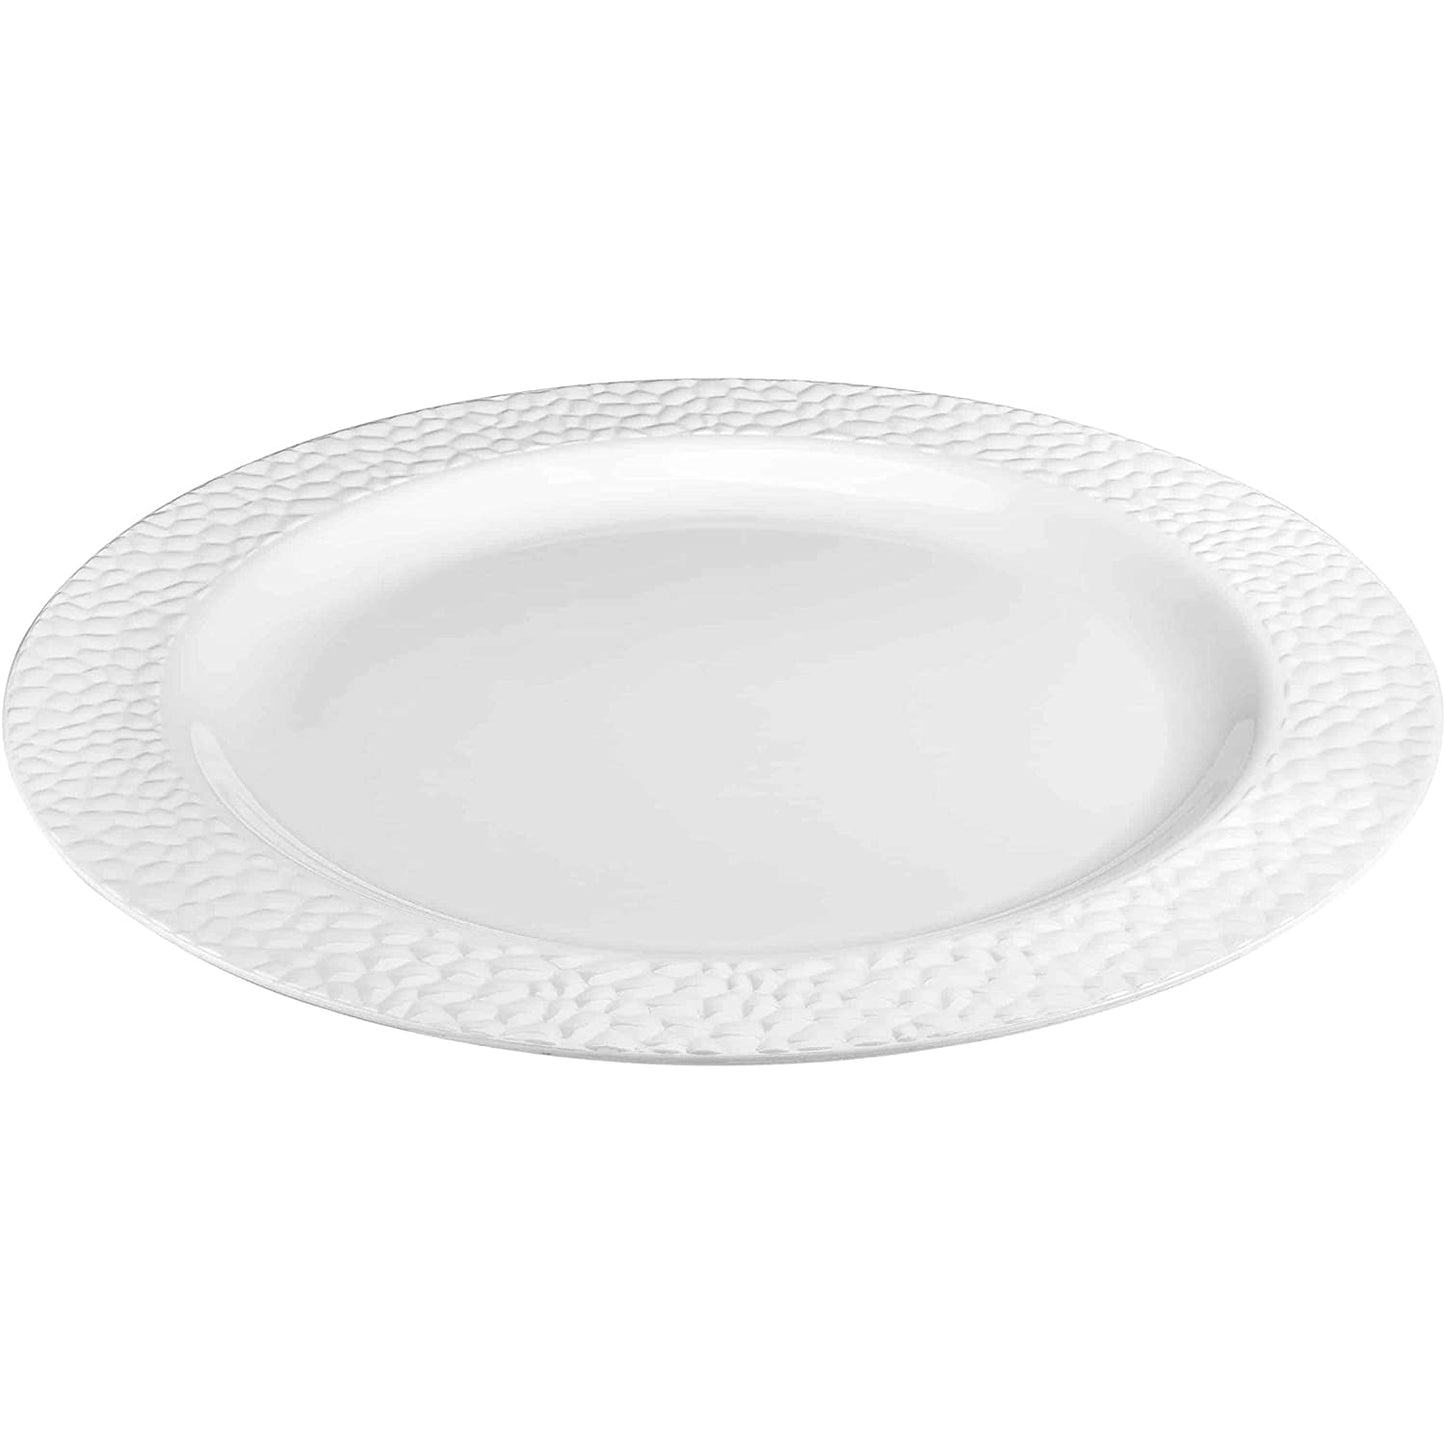 Charger Hammered Design Plates White 13" 2CT Tablesettings Decorline   